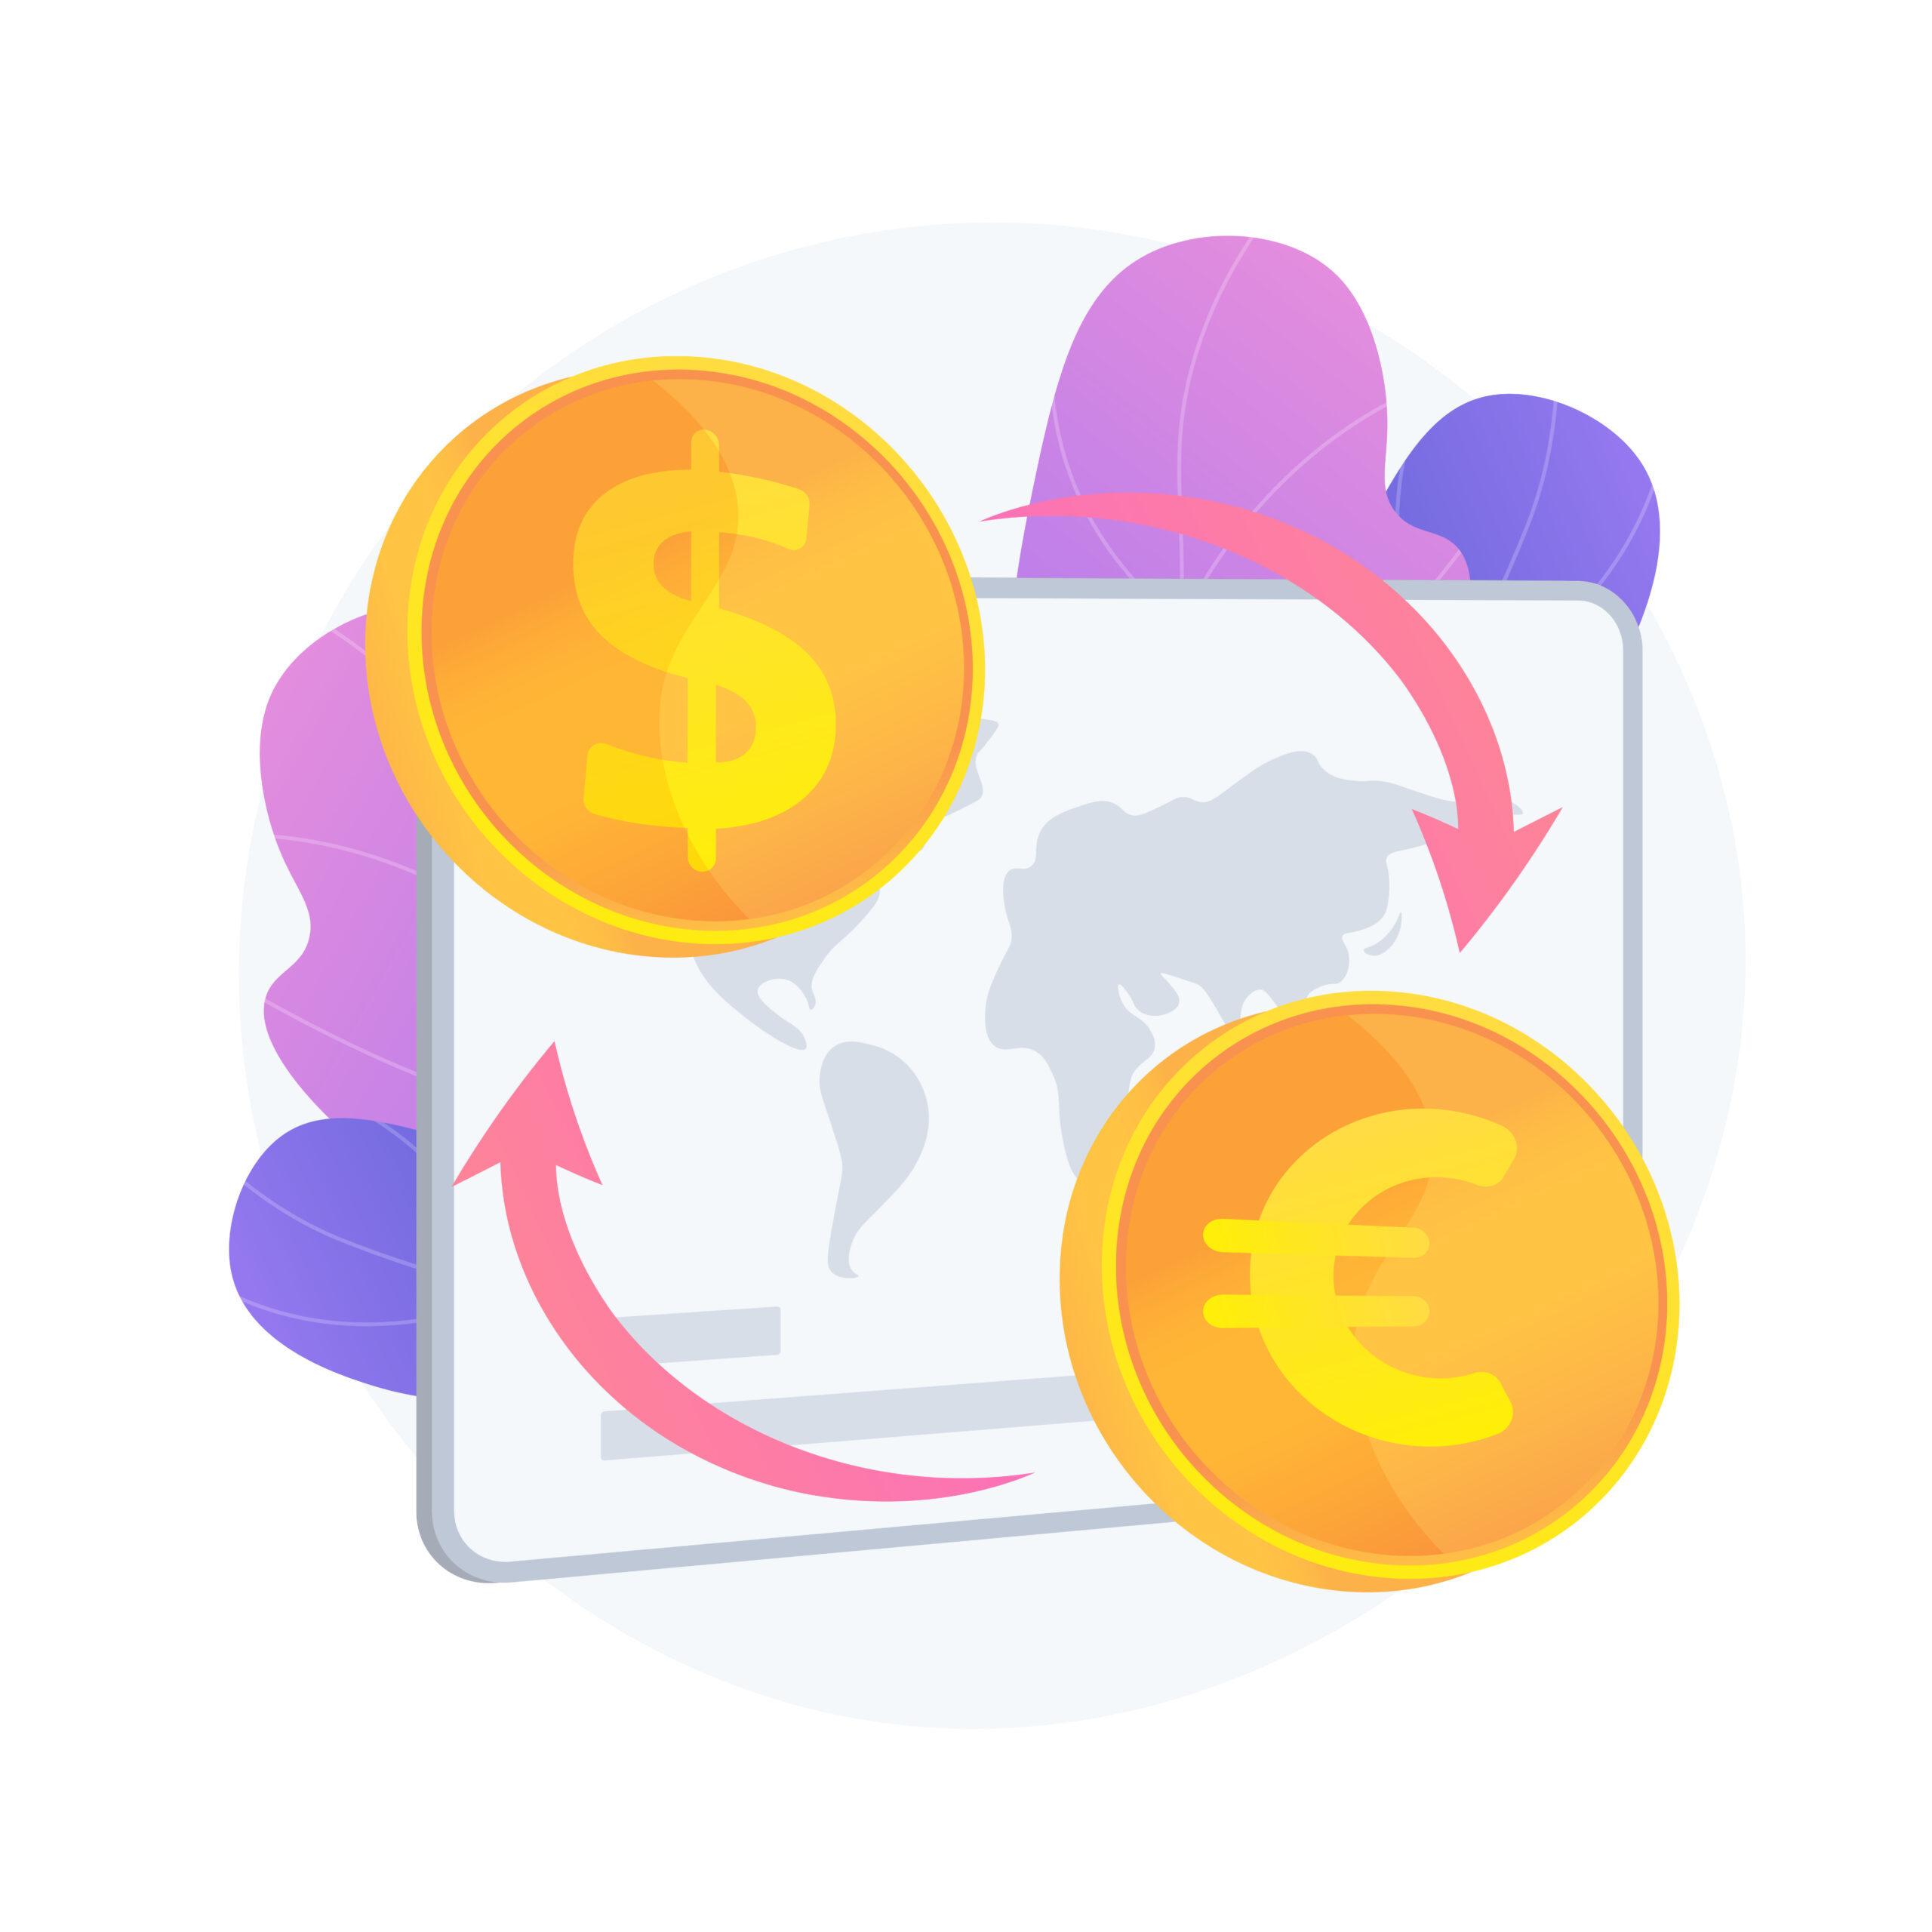 Currency exchange service. Monetary transfer, changing dollar to euro, buying and selling foreign money. Golden coins with EU and US currency symbols. Vector isolated concept metaphor illustration